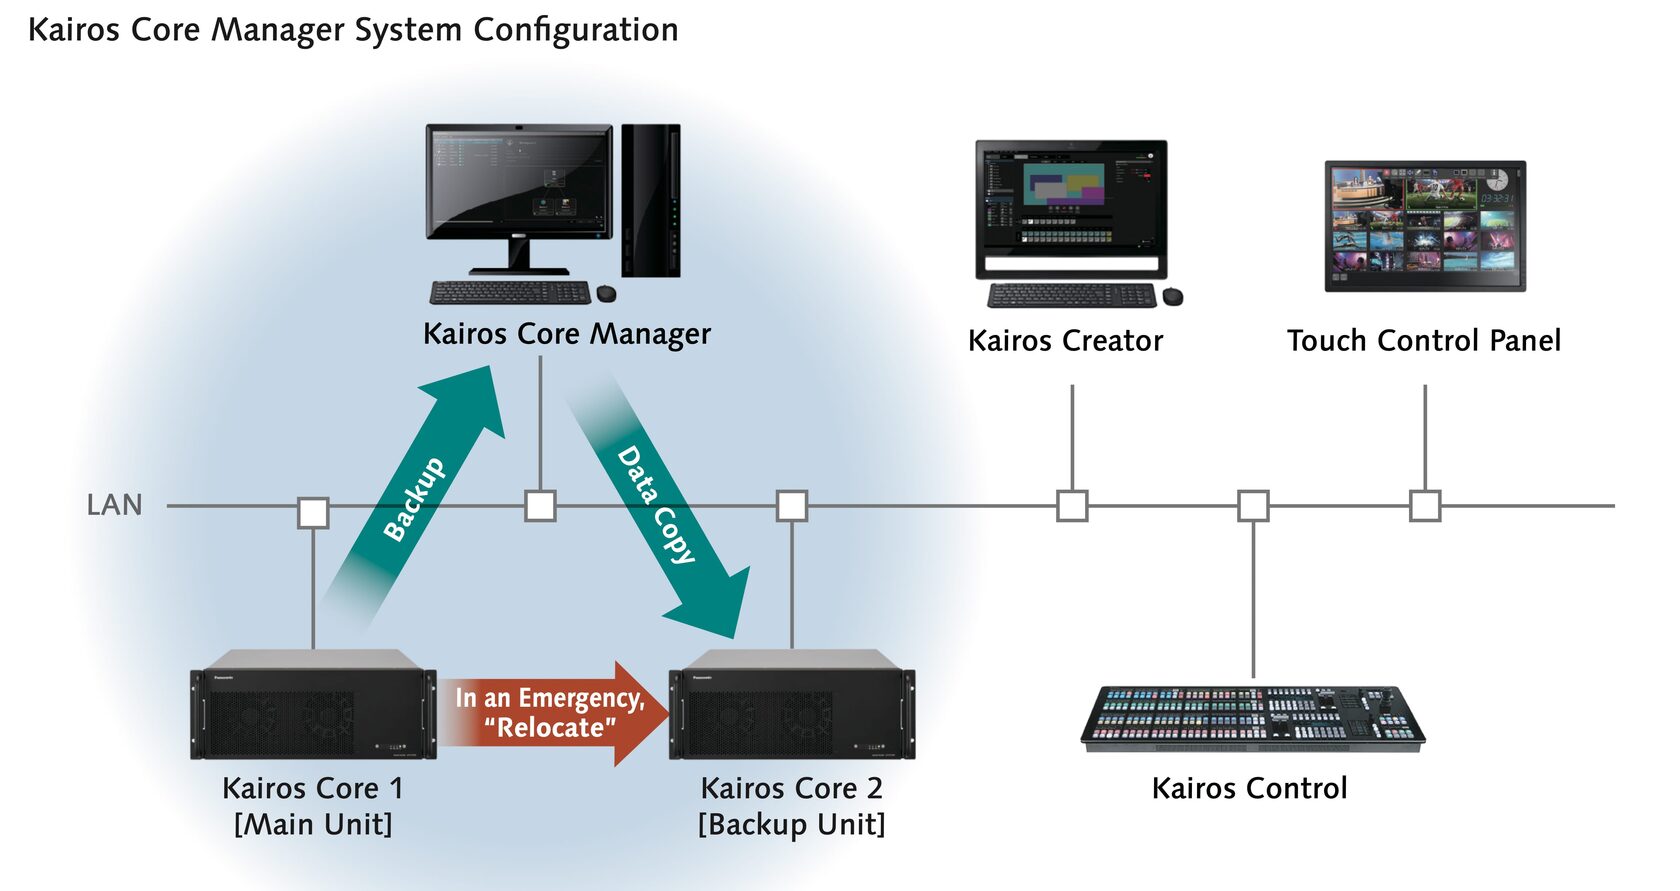 AT-SFCM10 - Kairos Core Manager System Configuration